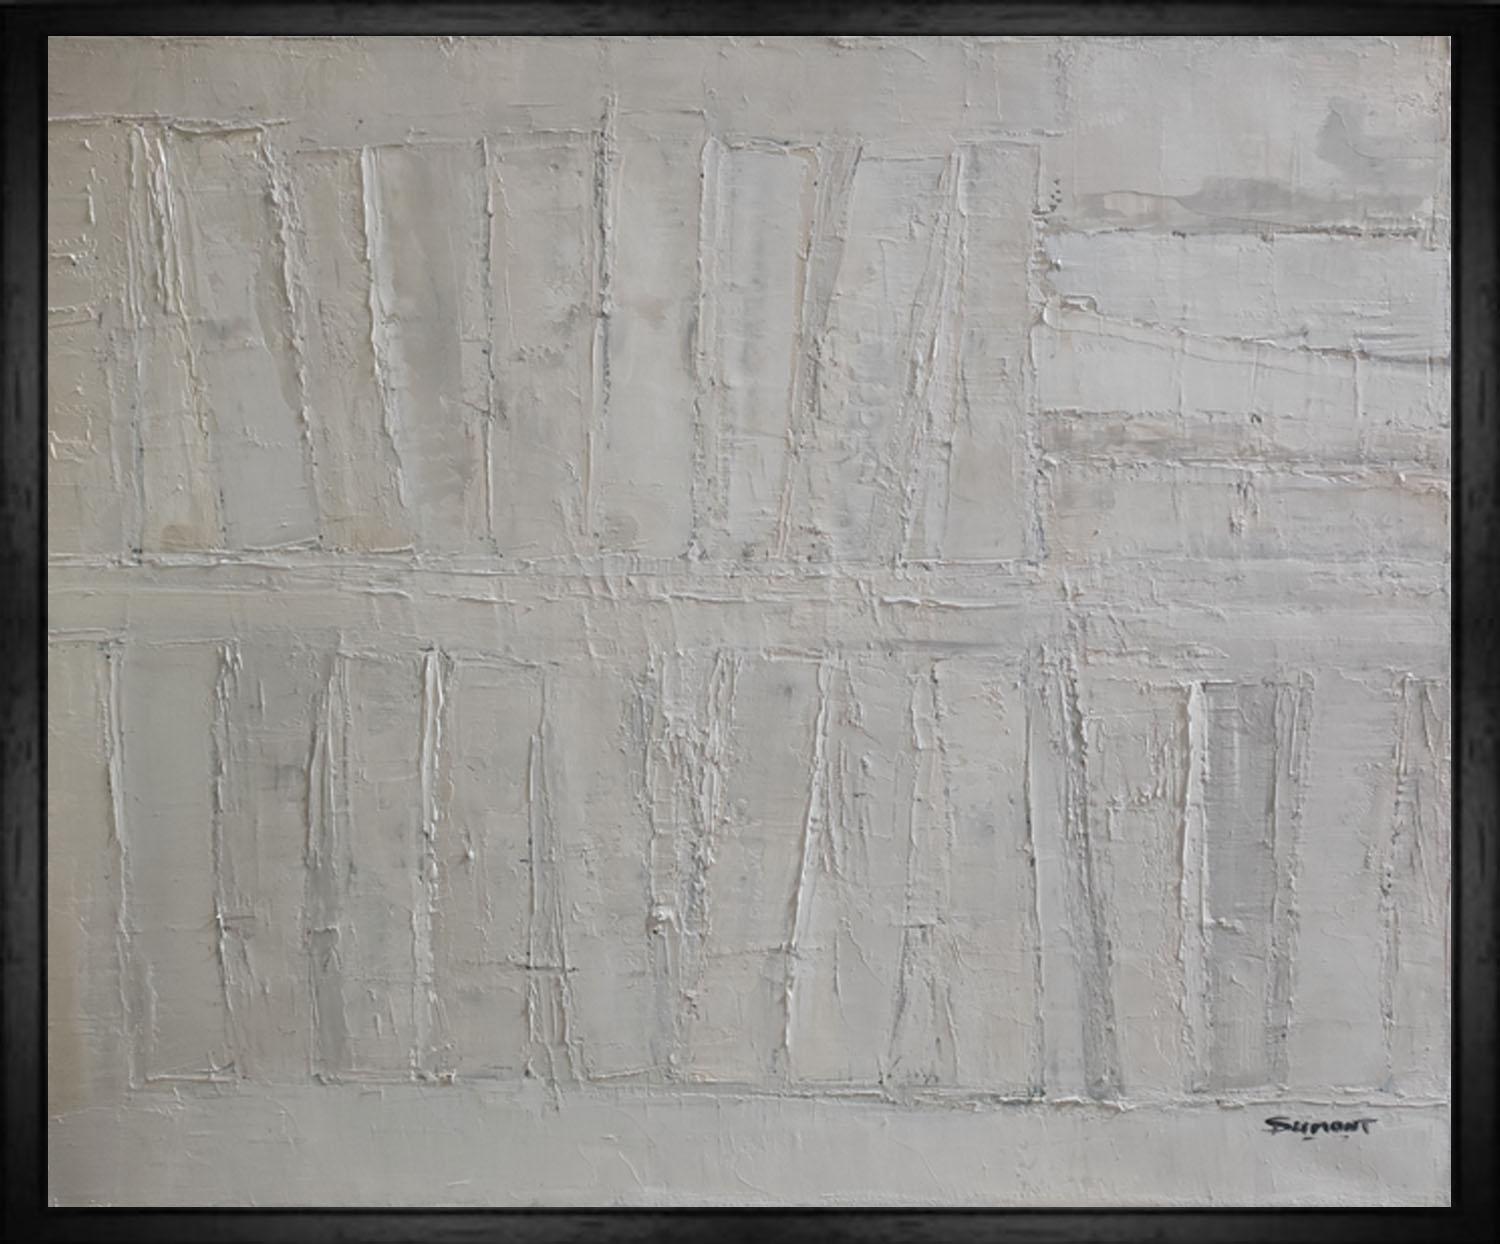 sans un mot, oil on canvas, white abstract , monochrome, minimalism, library  - Abstract Painting by SOPHIE DUMONT